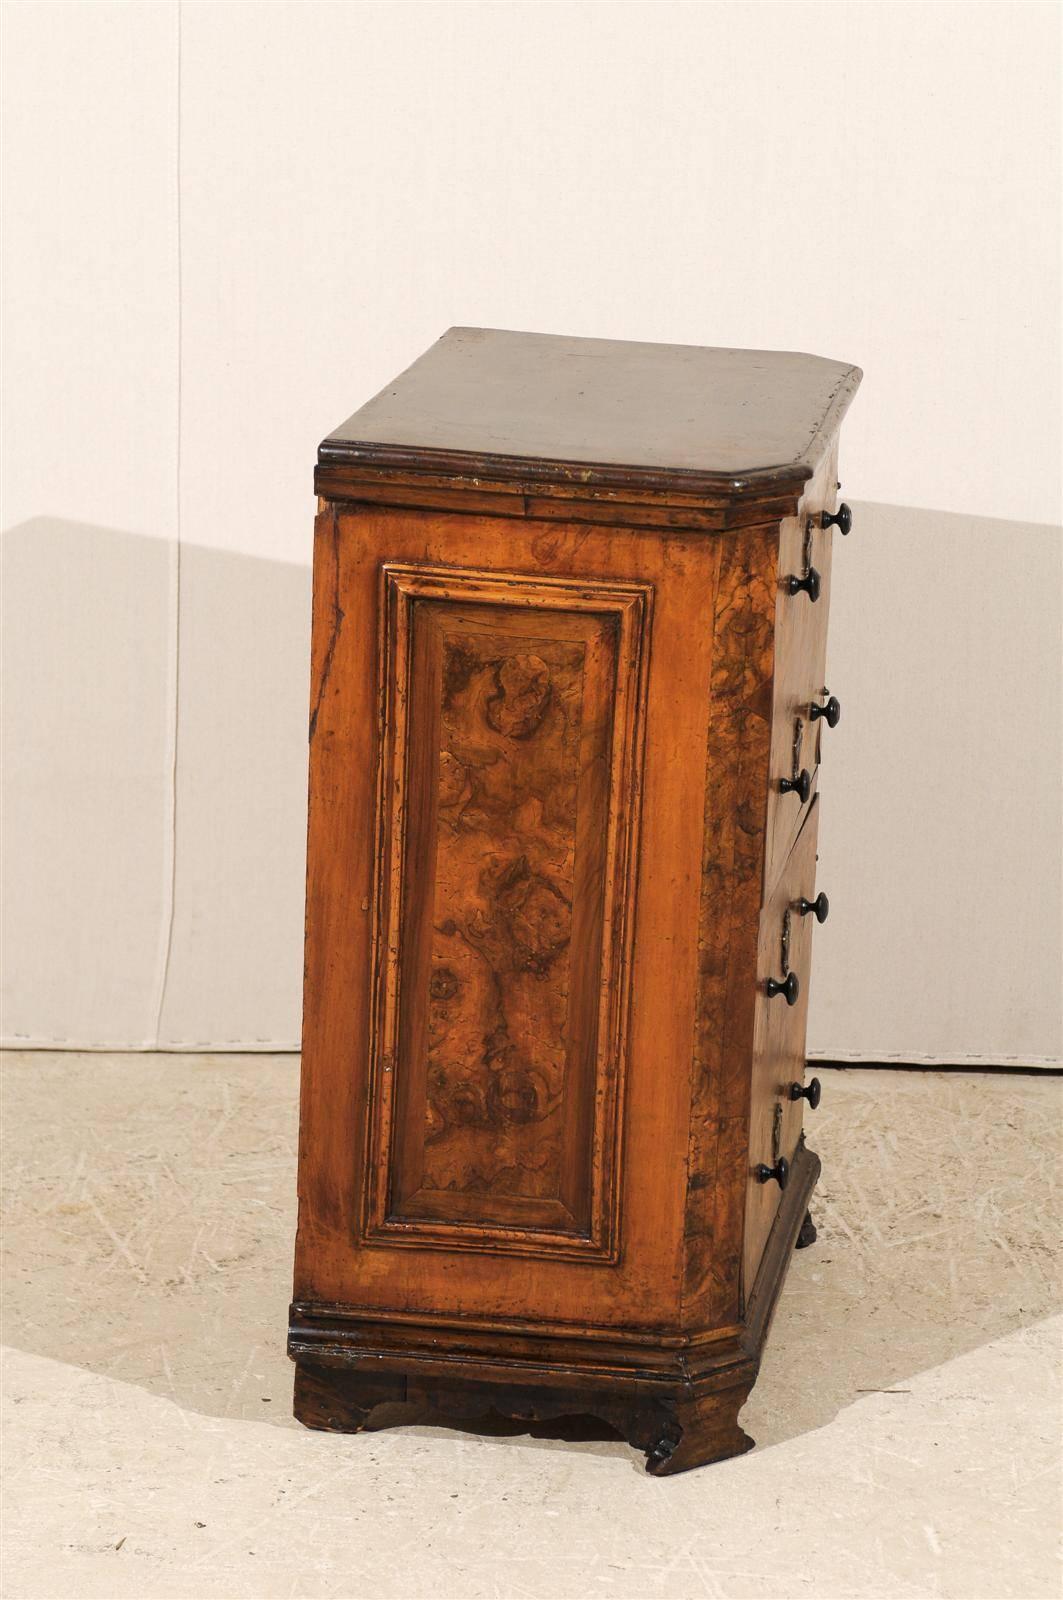 An Italian Early 19th Century Small Shelf Cabinet with Nice Wood Grain Visible 3